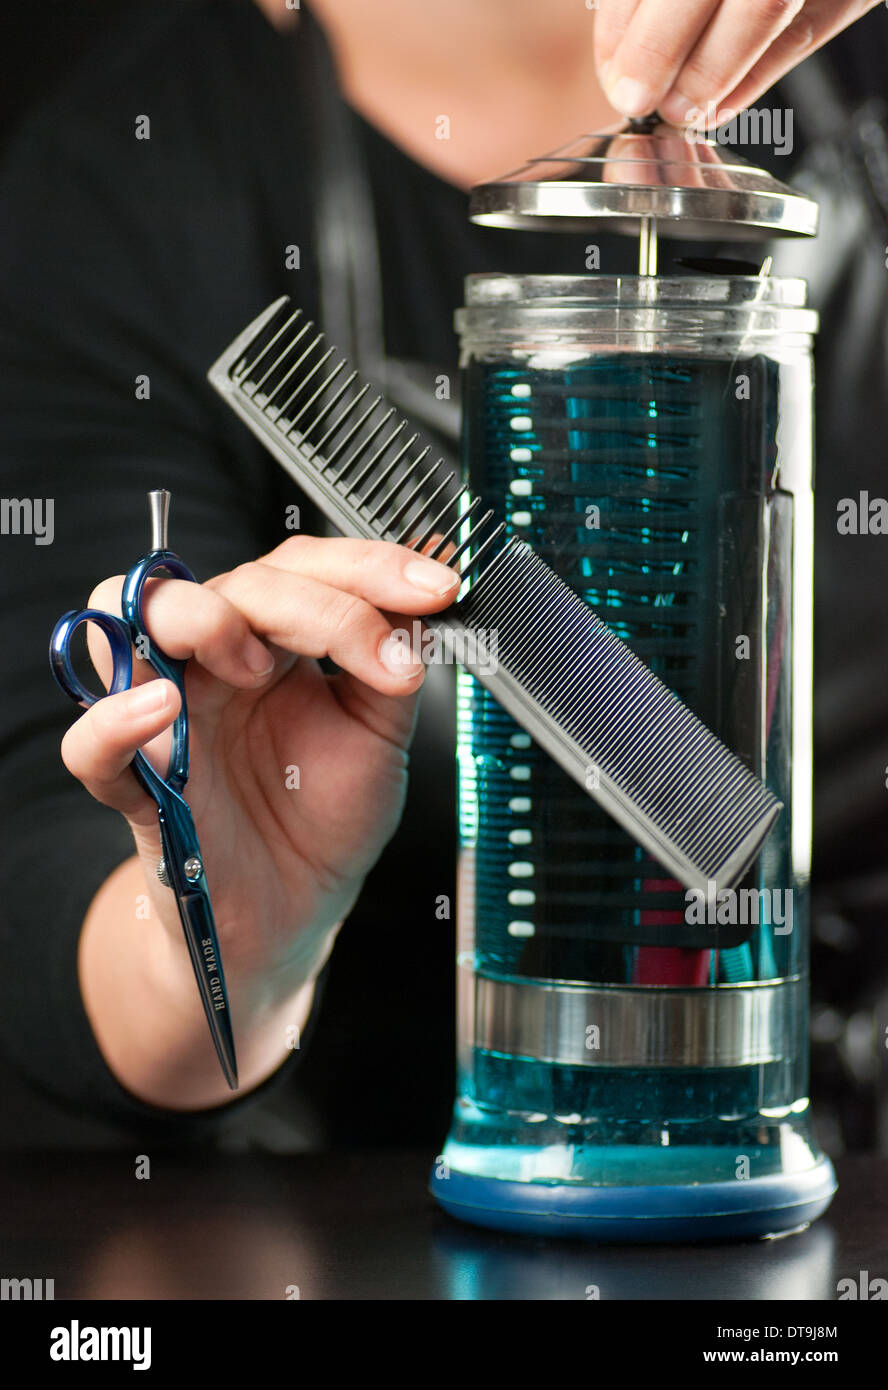 Stylist Places Comb In Disinfectant Stock Photo